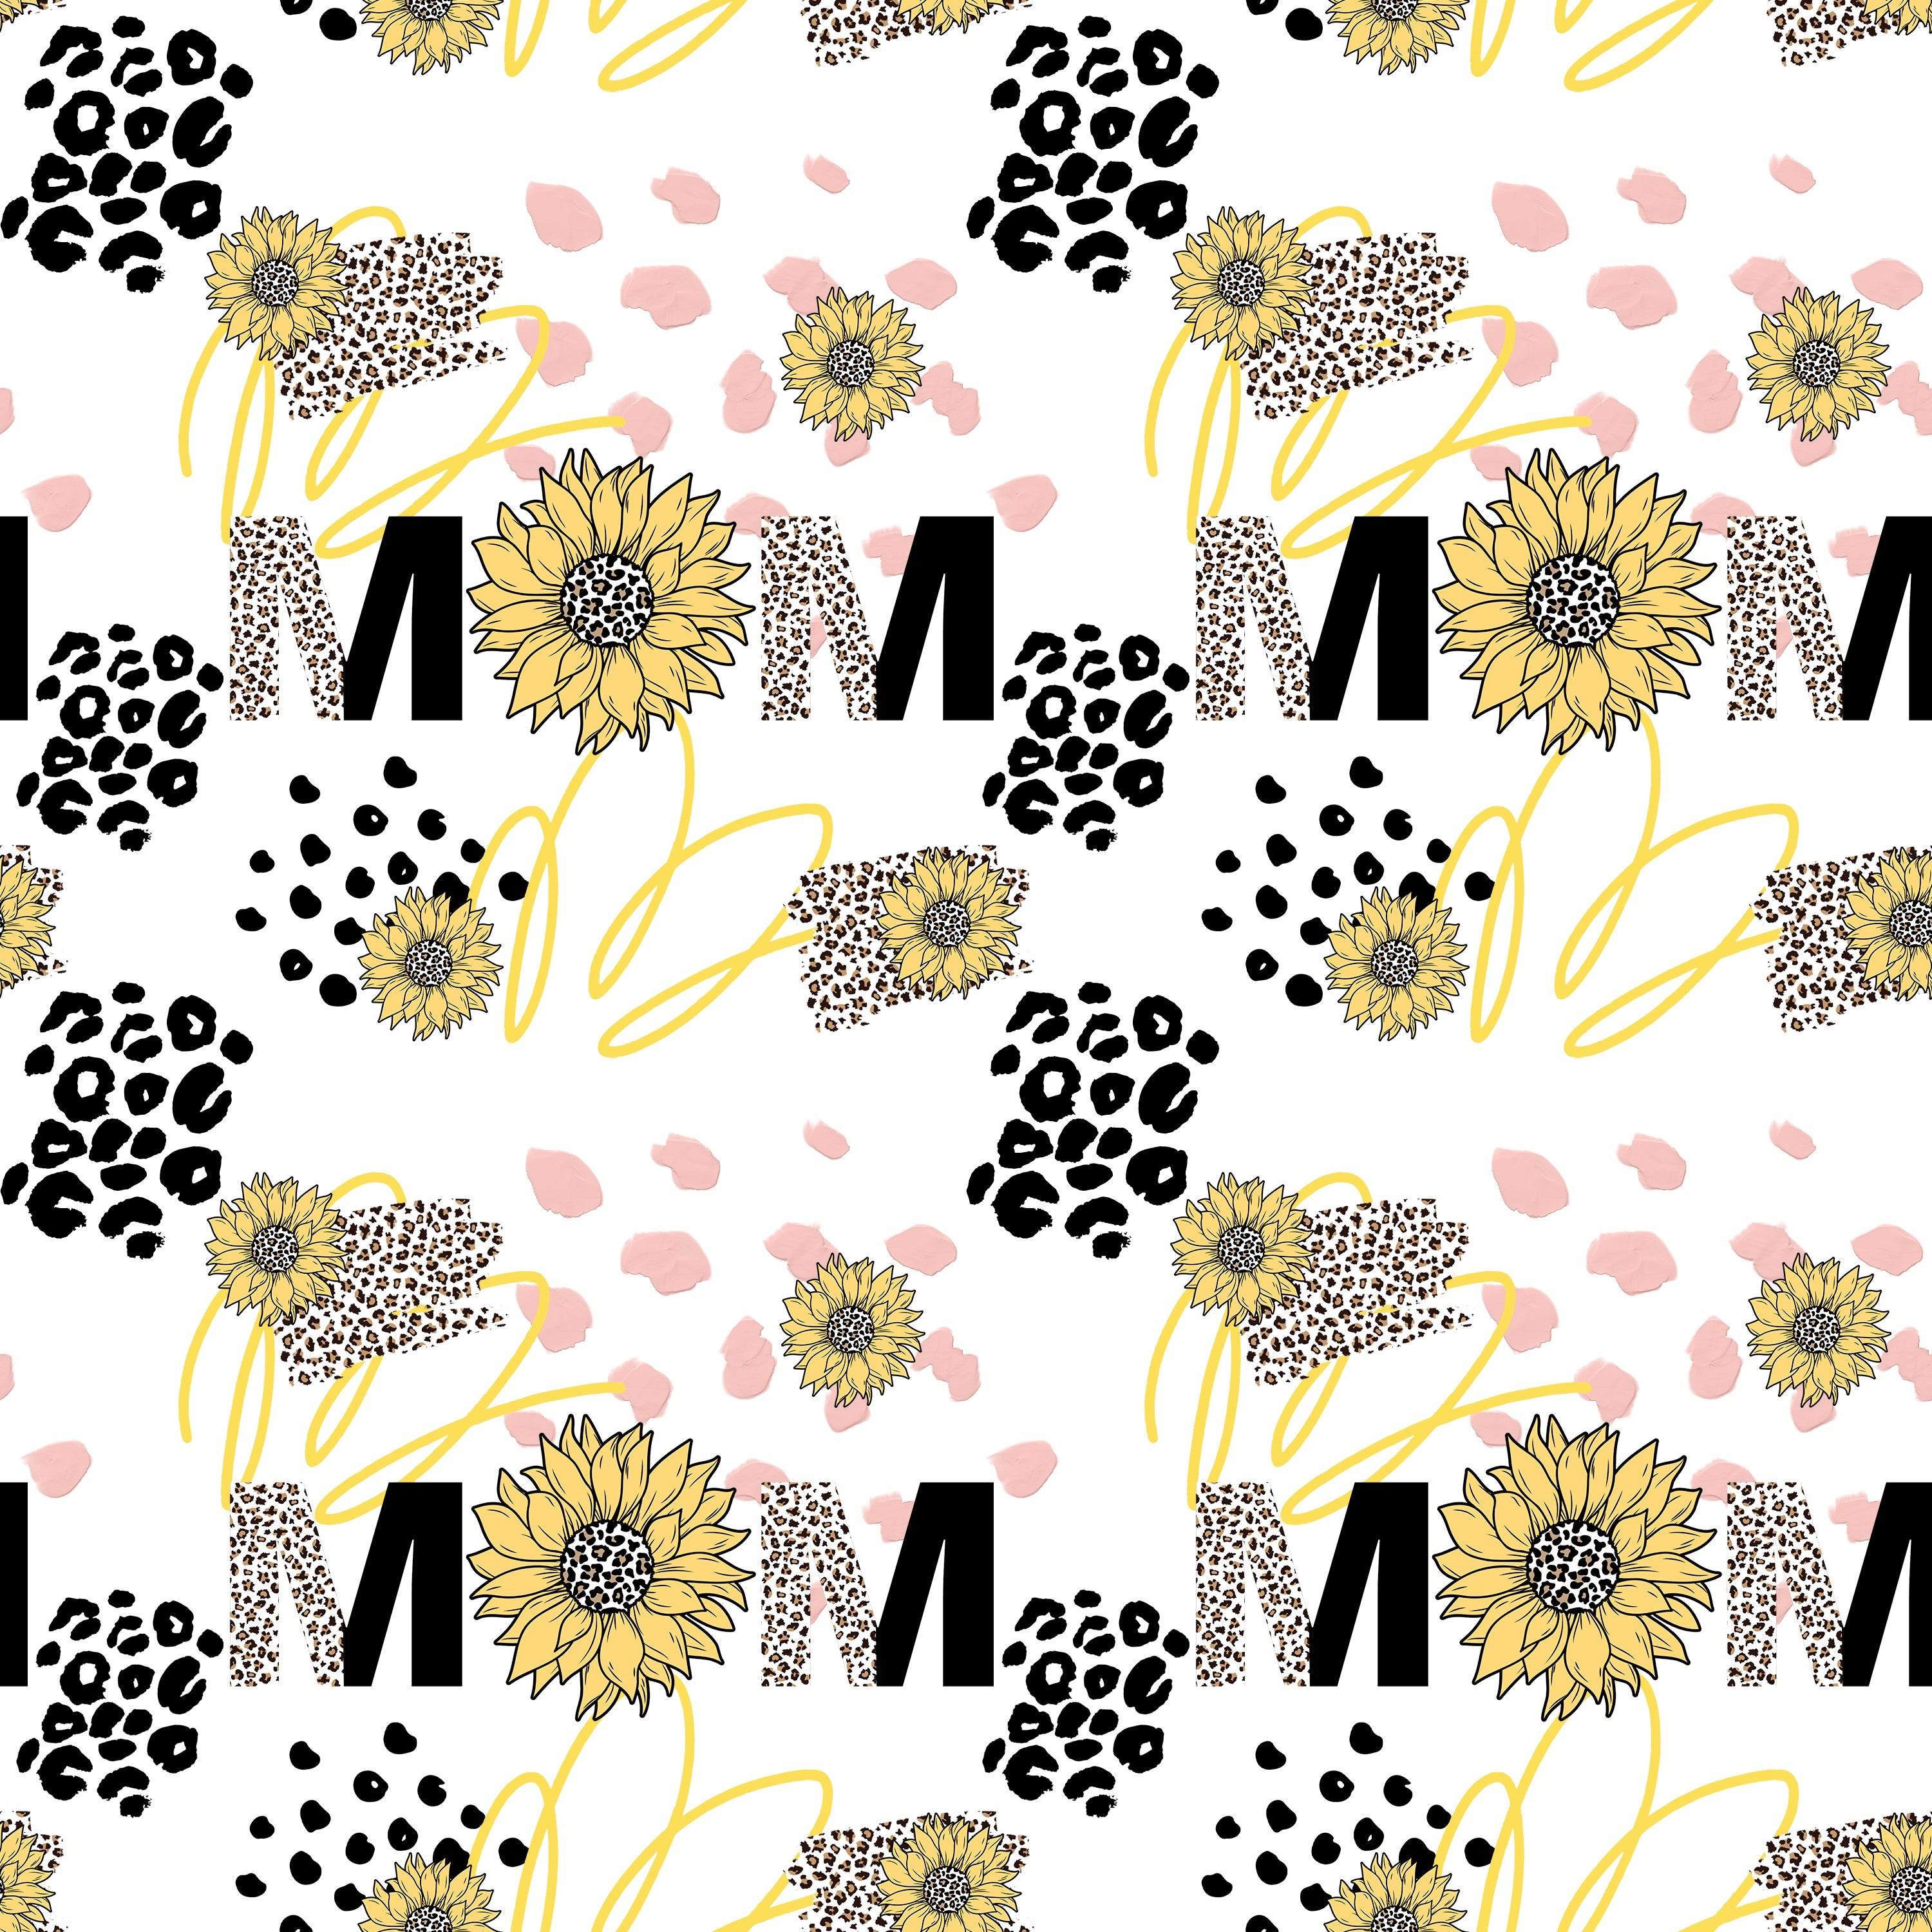 Mom with Sunflowers and Leopard Print Pattern Vinyl 12" x 12" - The Vinyl Haus